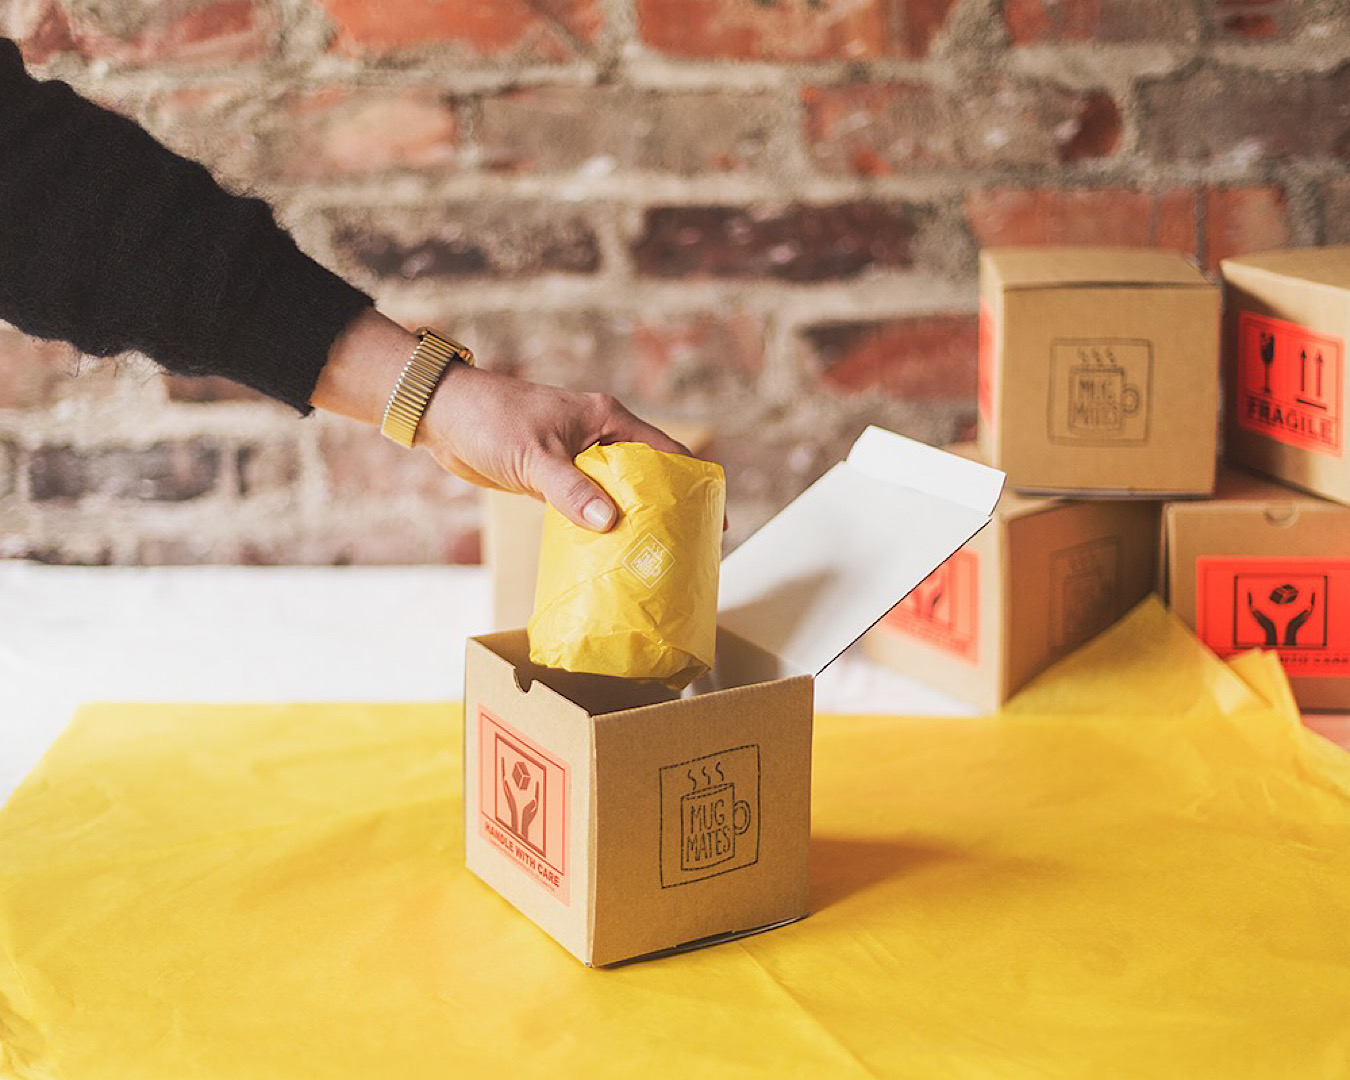 A hand reaches into a cardboard box lifting out a mystery mug wrapped in yellow tissue paper. 